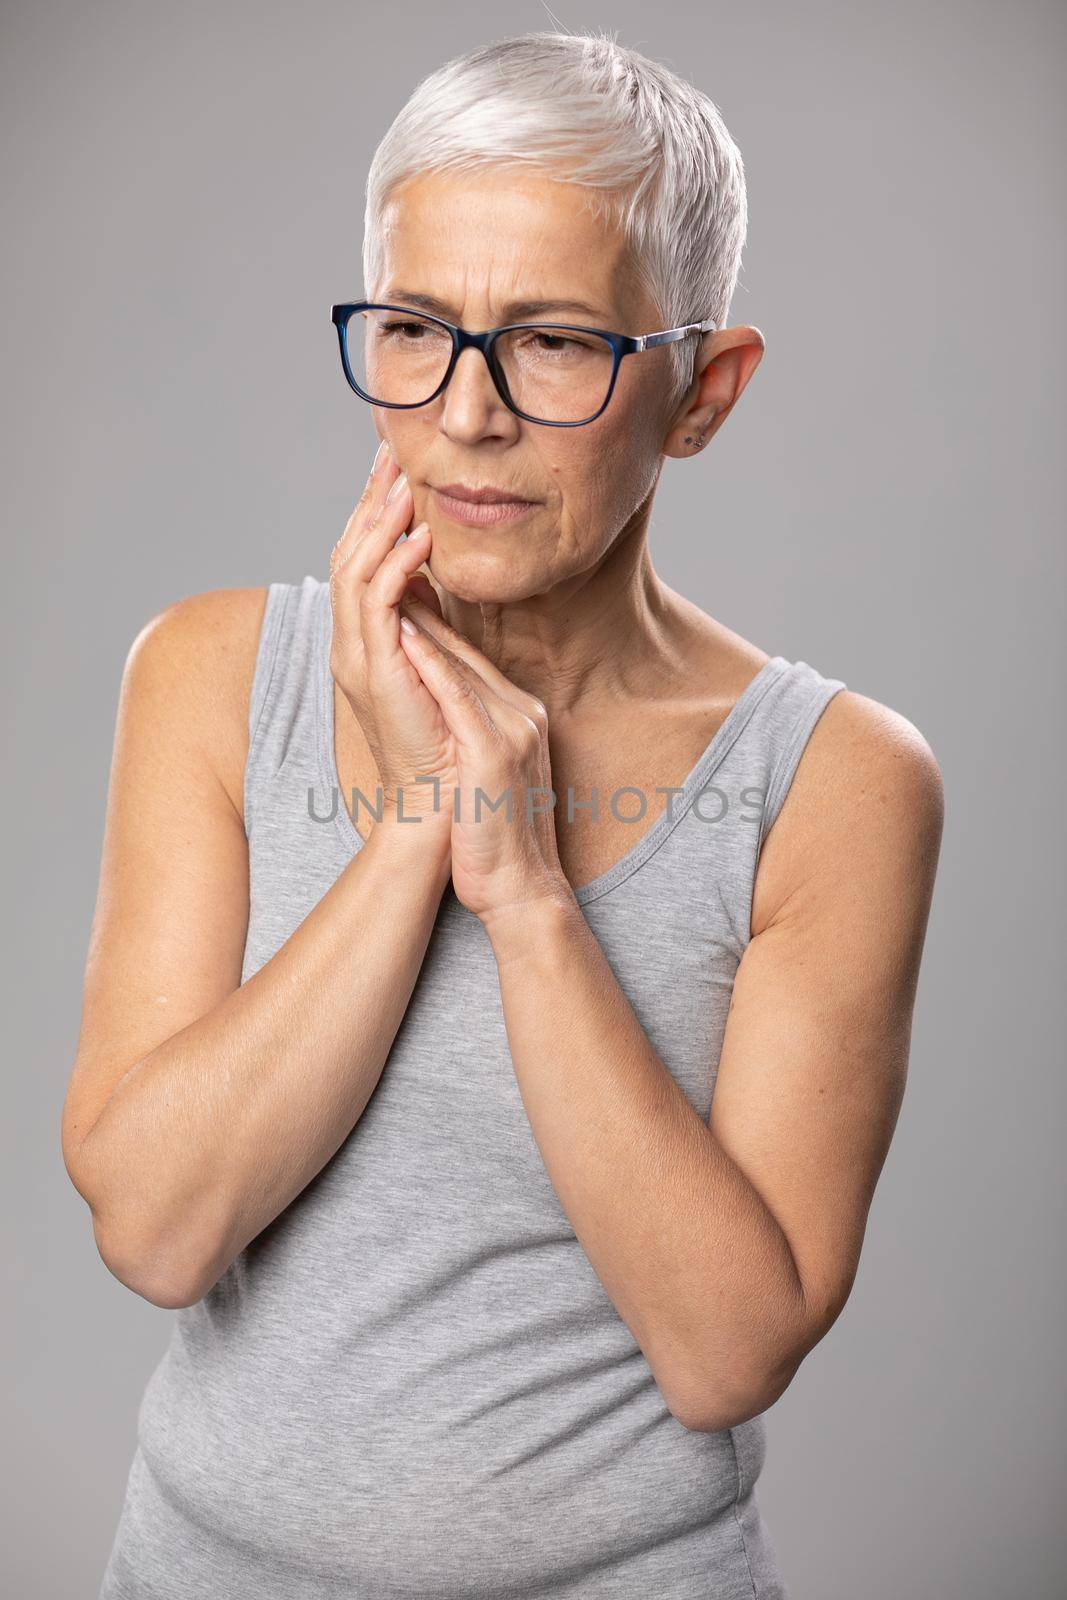 Toothache. pain tooth in mouth, old woman with short gray hair and tootache problems. Worried expression, healthcare and medicine concept